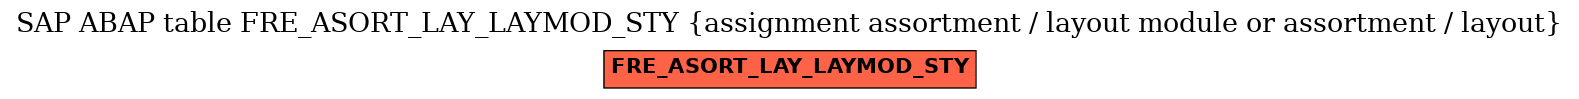 E-R Diagram for table FRE_ASORT_LAY_LAYMOD_STY (assignment assortment / layout module or assortment / layout)